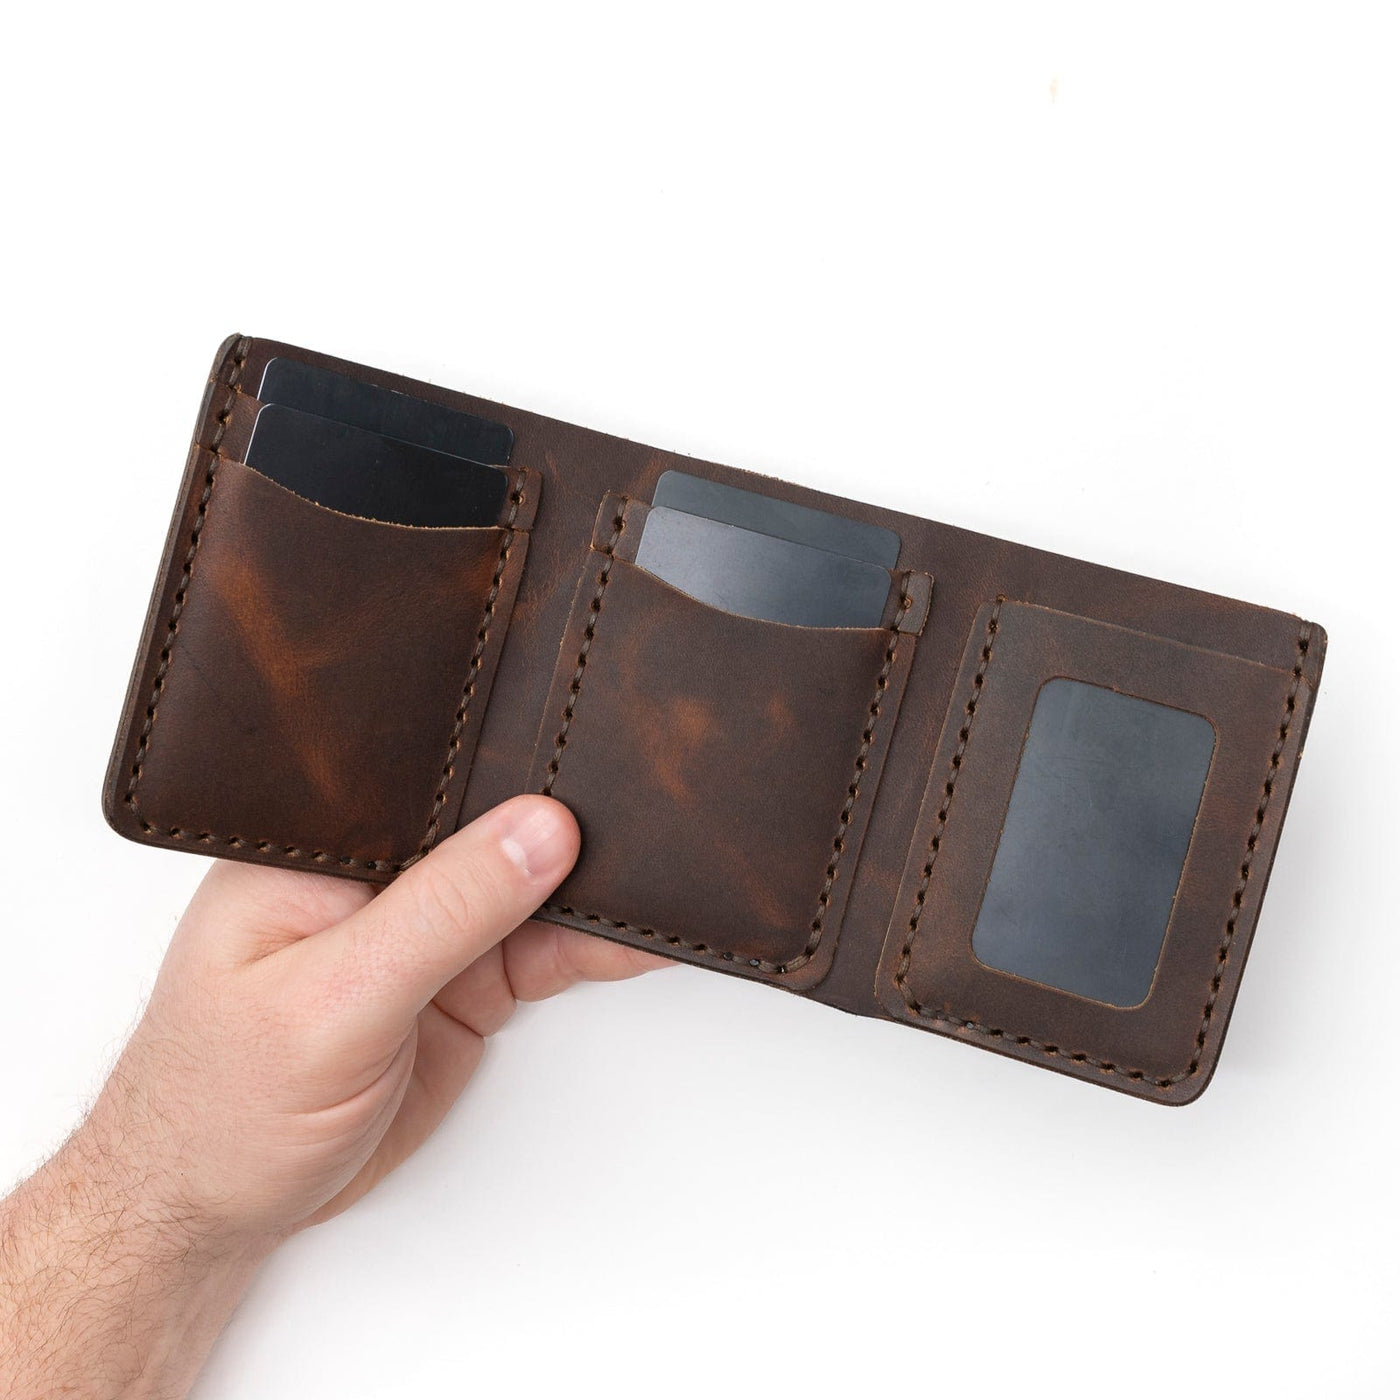 Leather Trifold Wallet - Heritage Brown Popov Leather